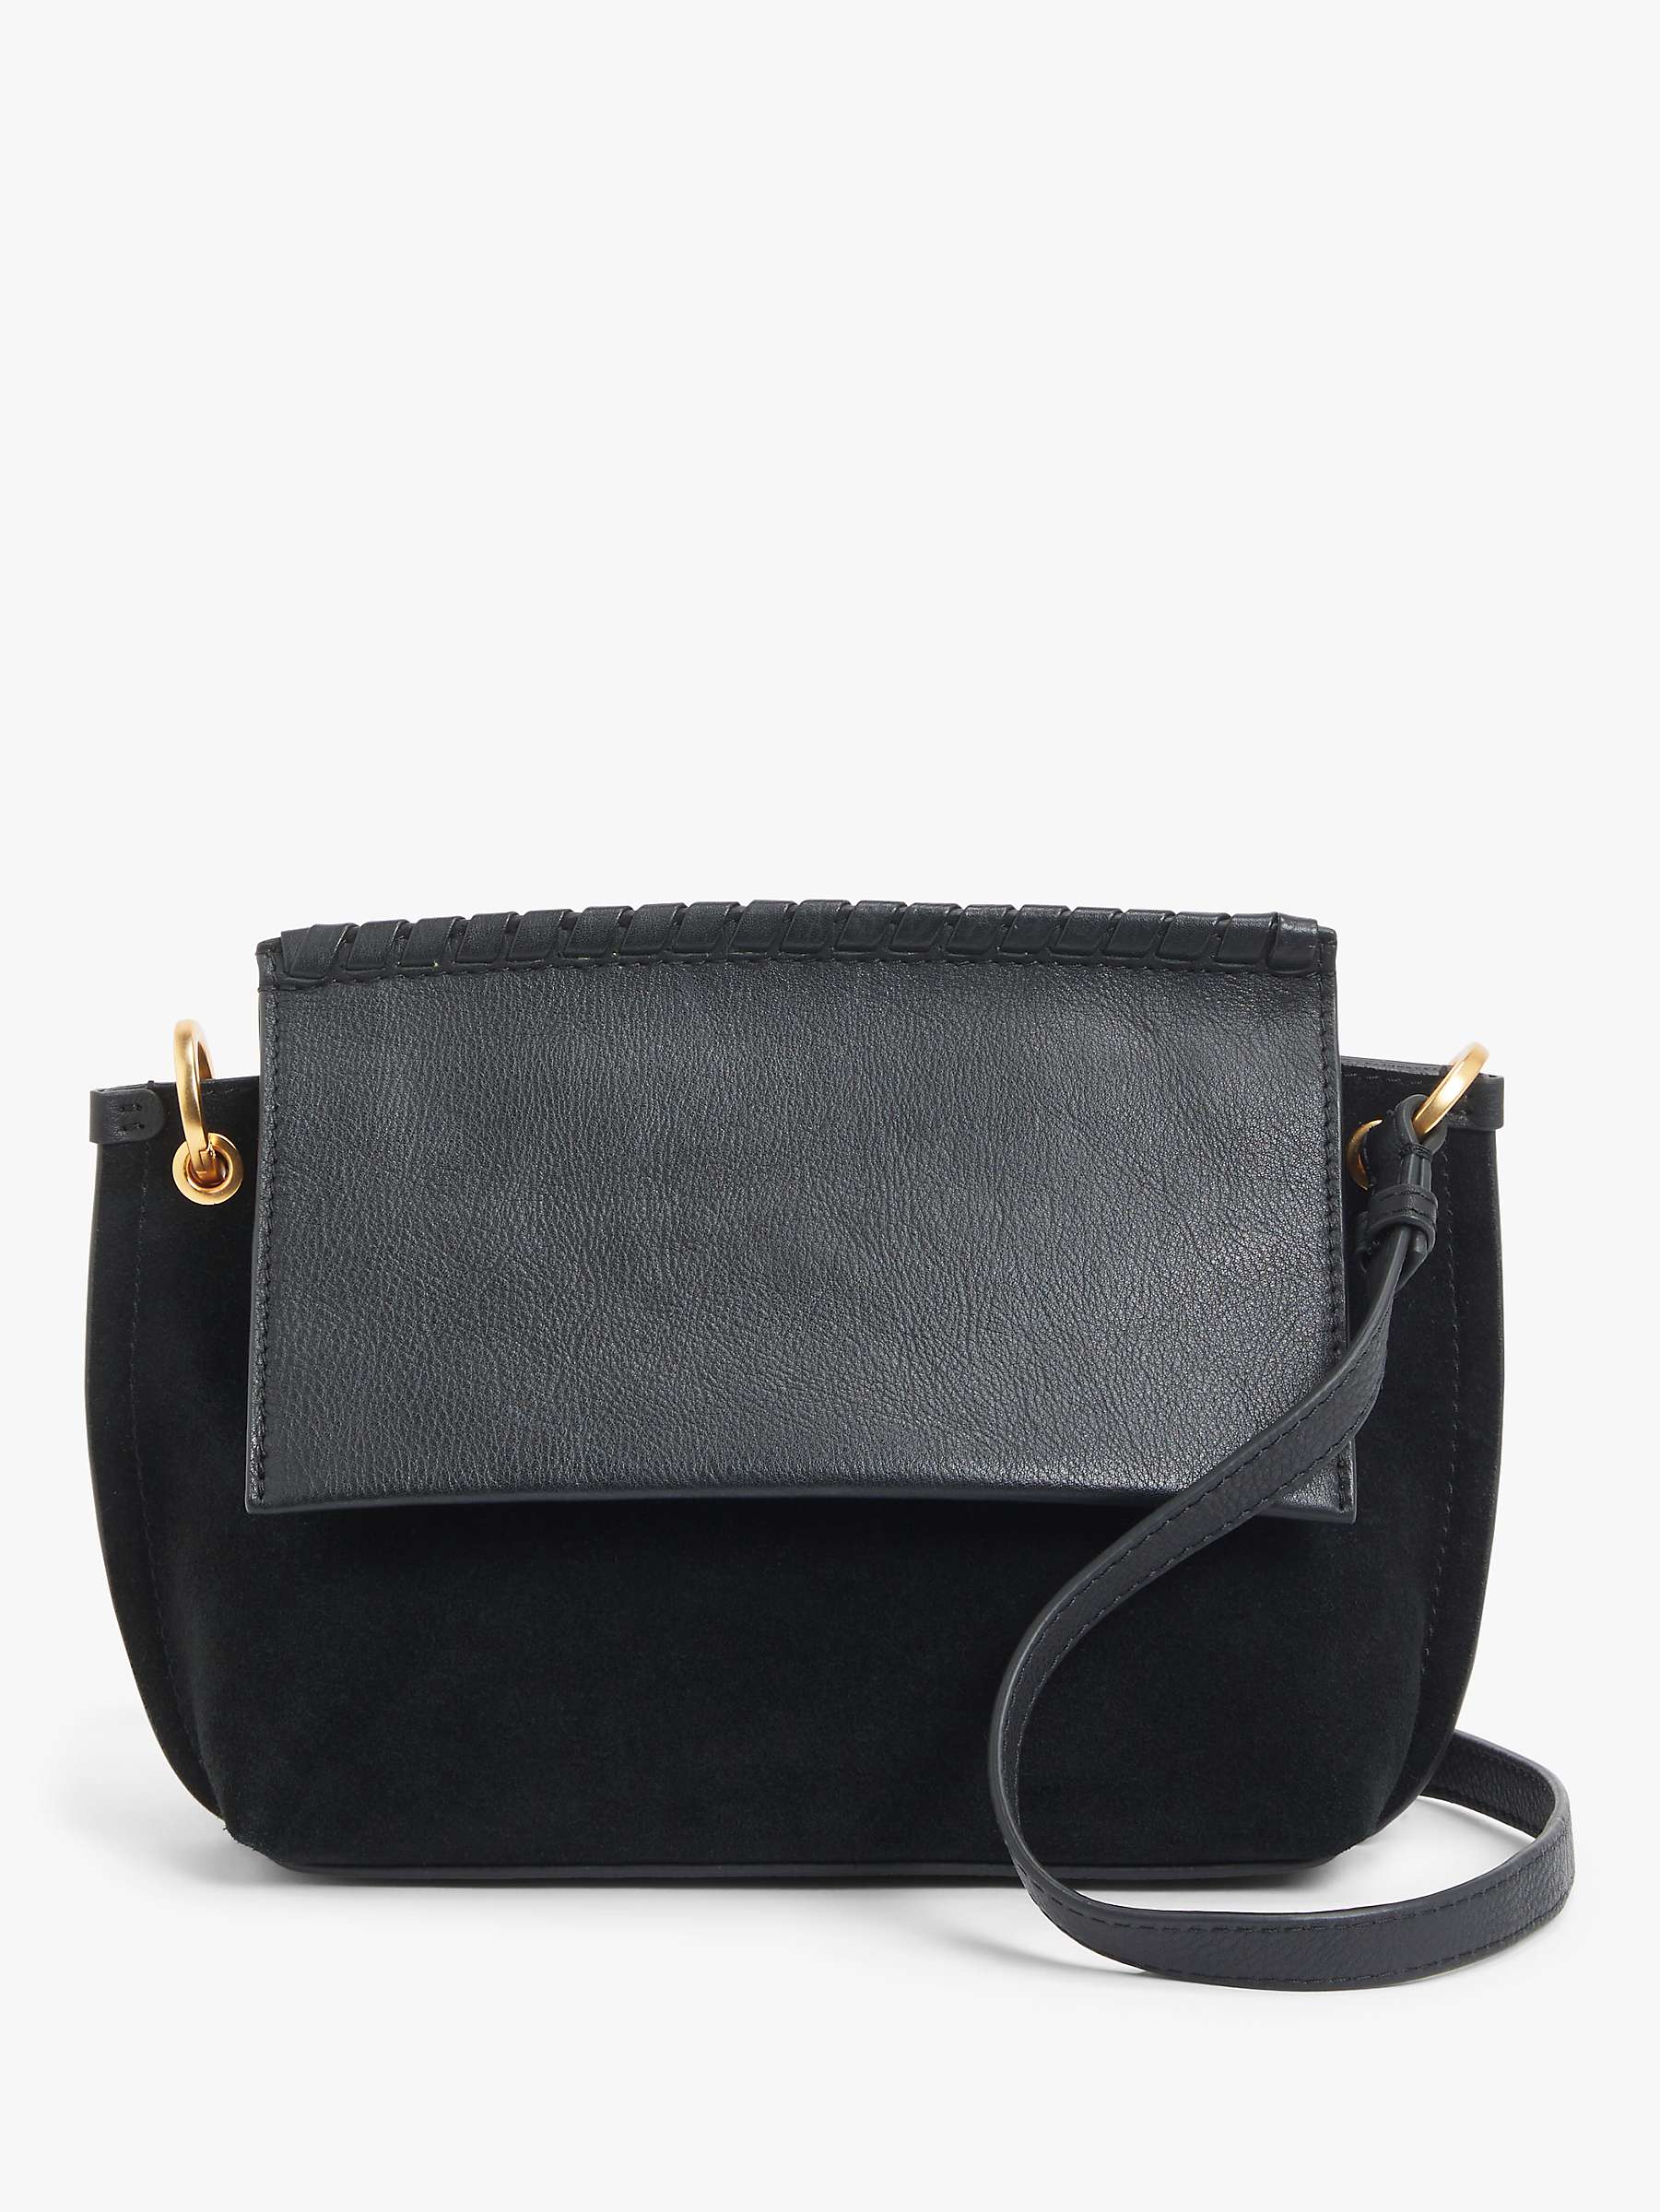 AND/OR Leather & Suede Flap Cross Body Bag, Black at John Lewis & Partners